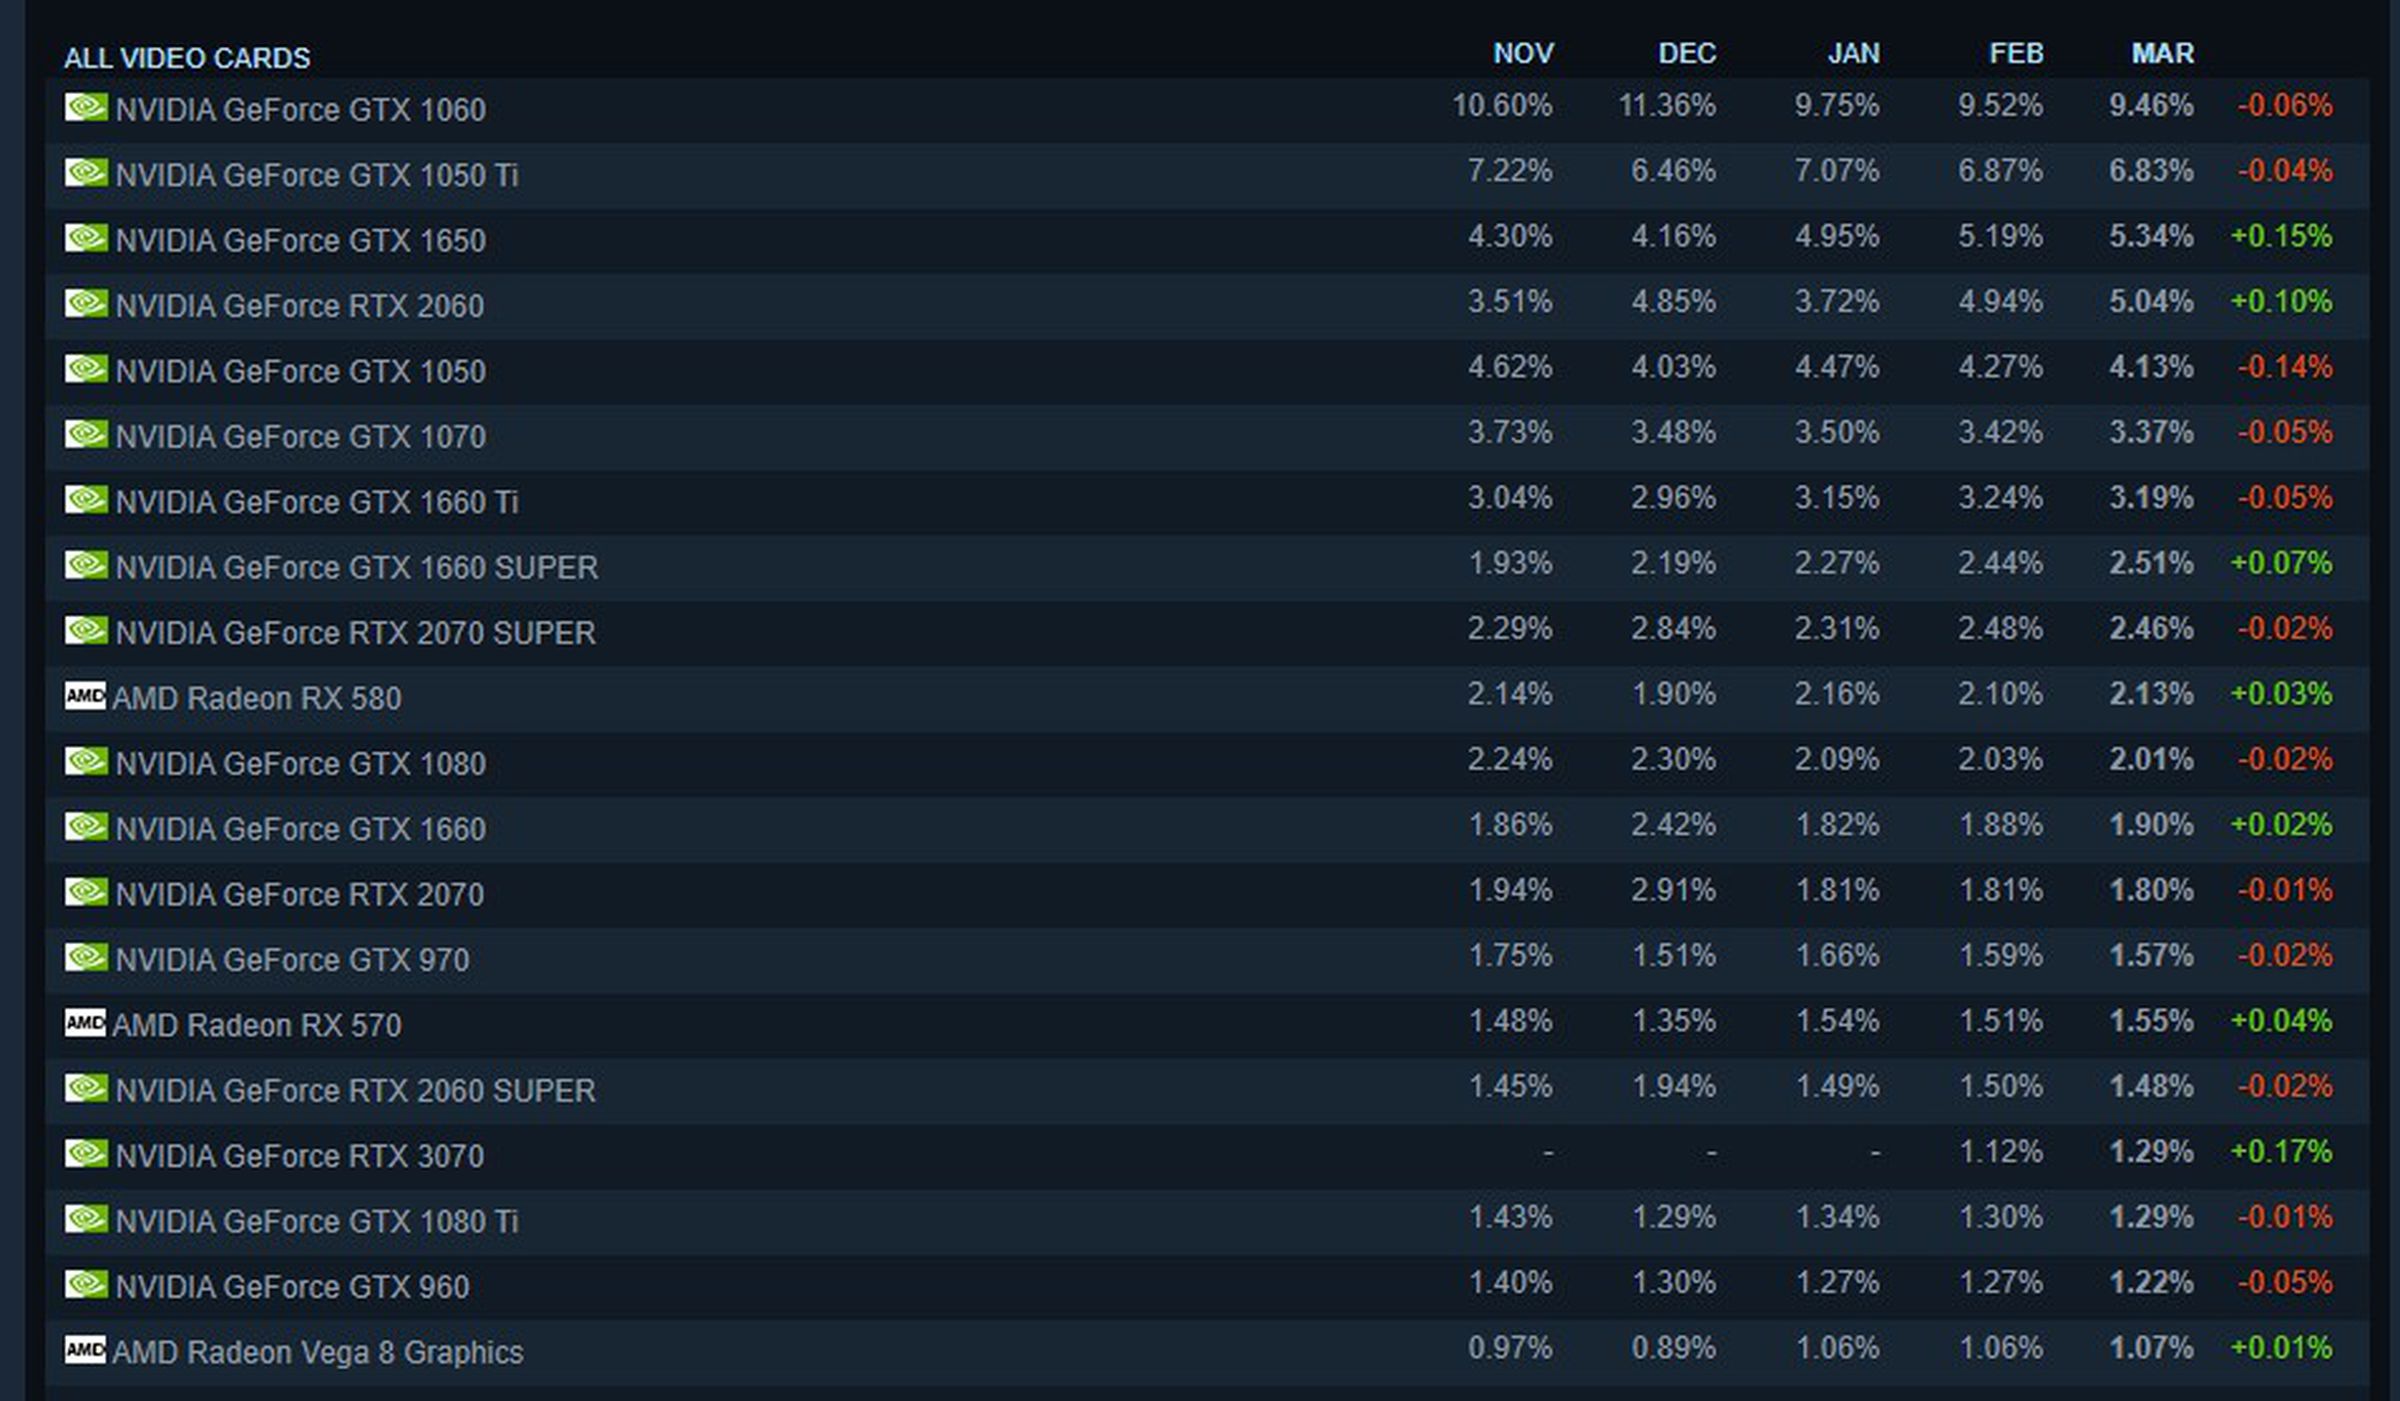 The top 20 GPUs on Steam, as of March 2021.